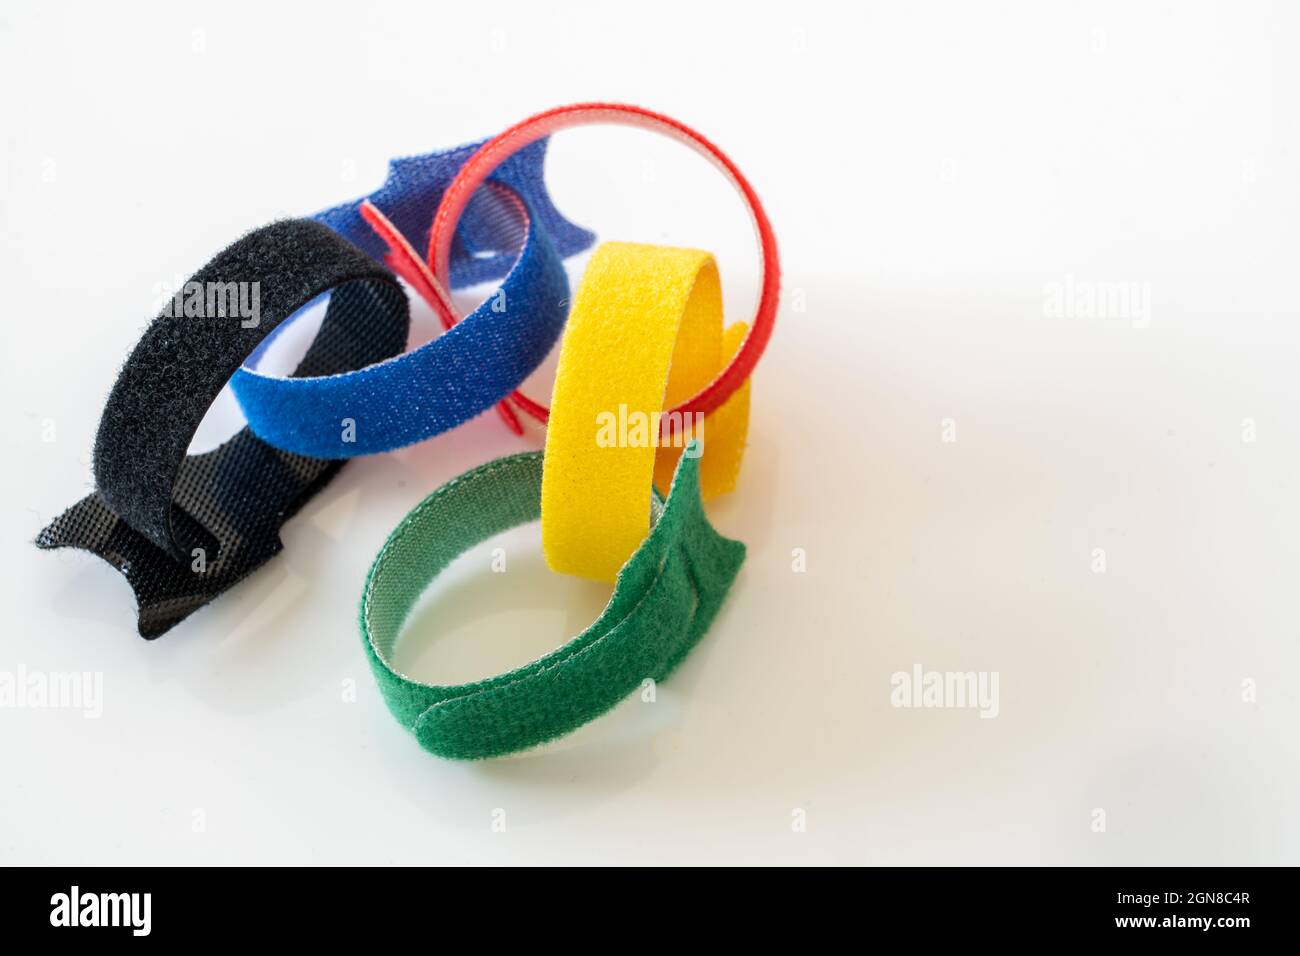 selection of five primary colored velcro hook and loop fastner ties joined together Stock Photo